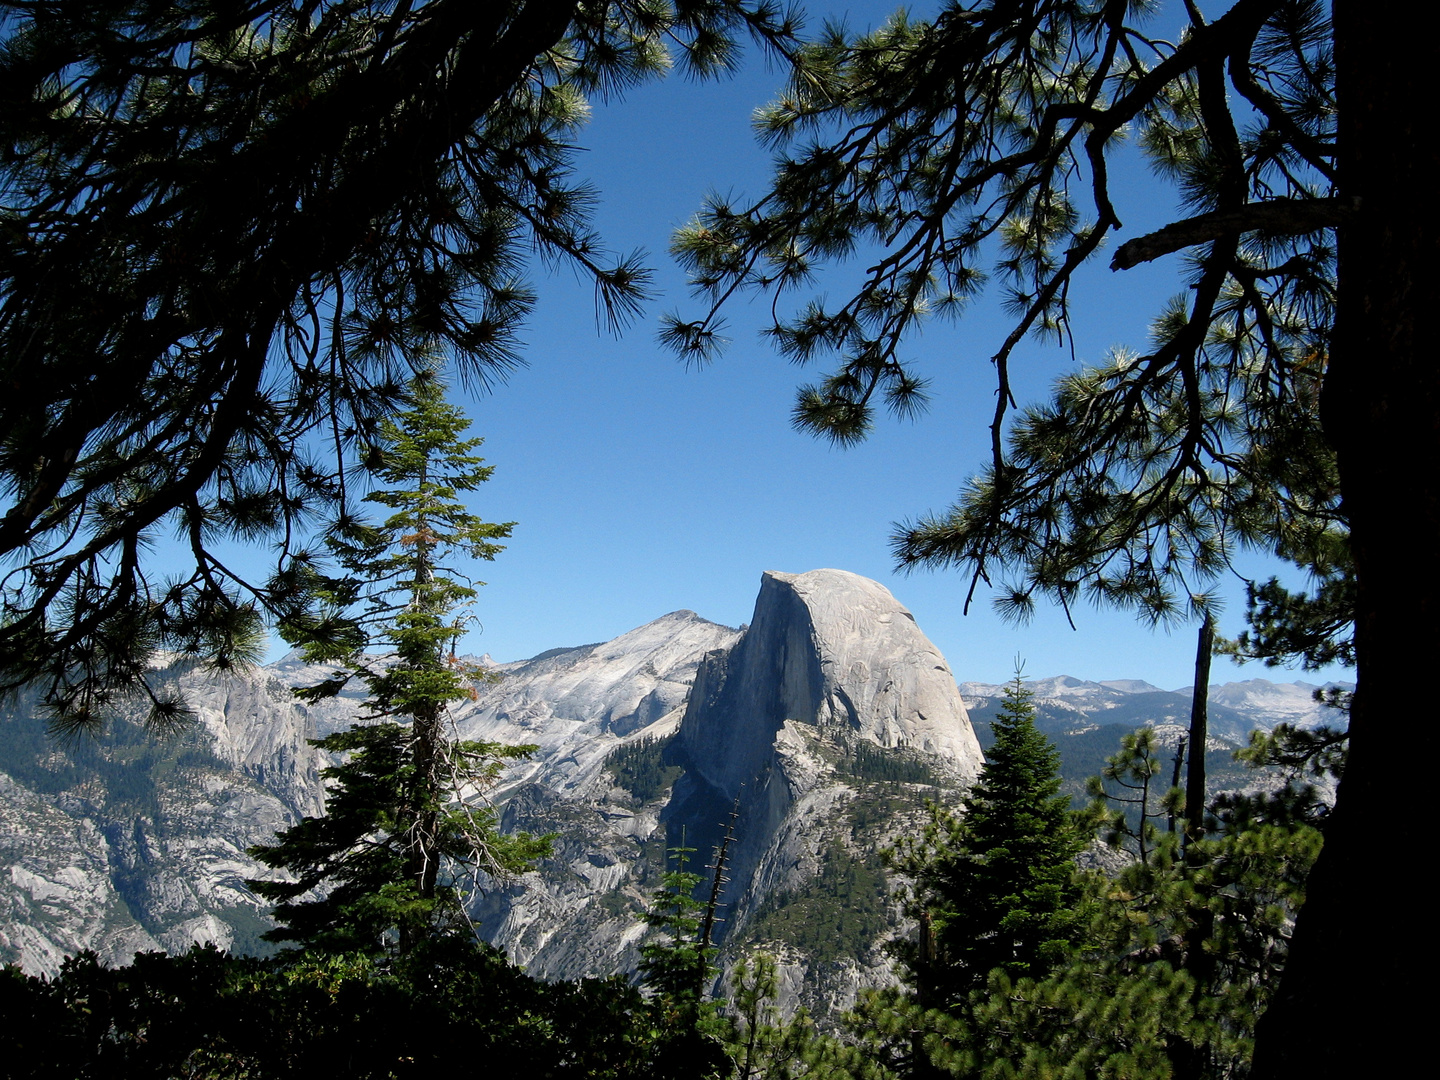 Looking for the Half Dome